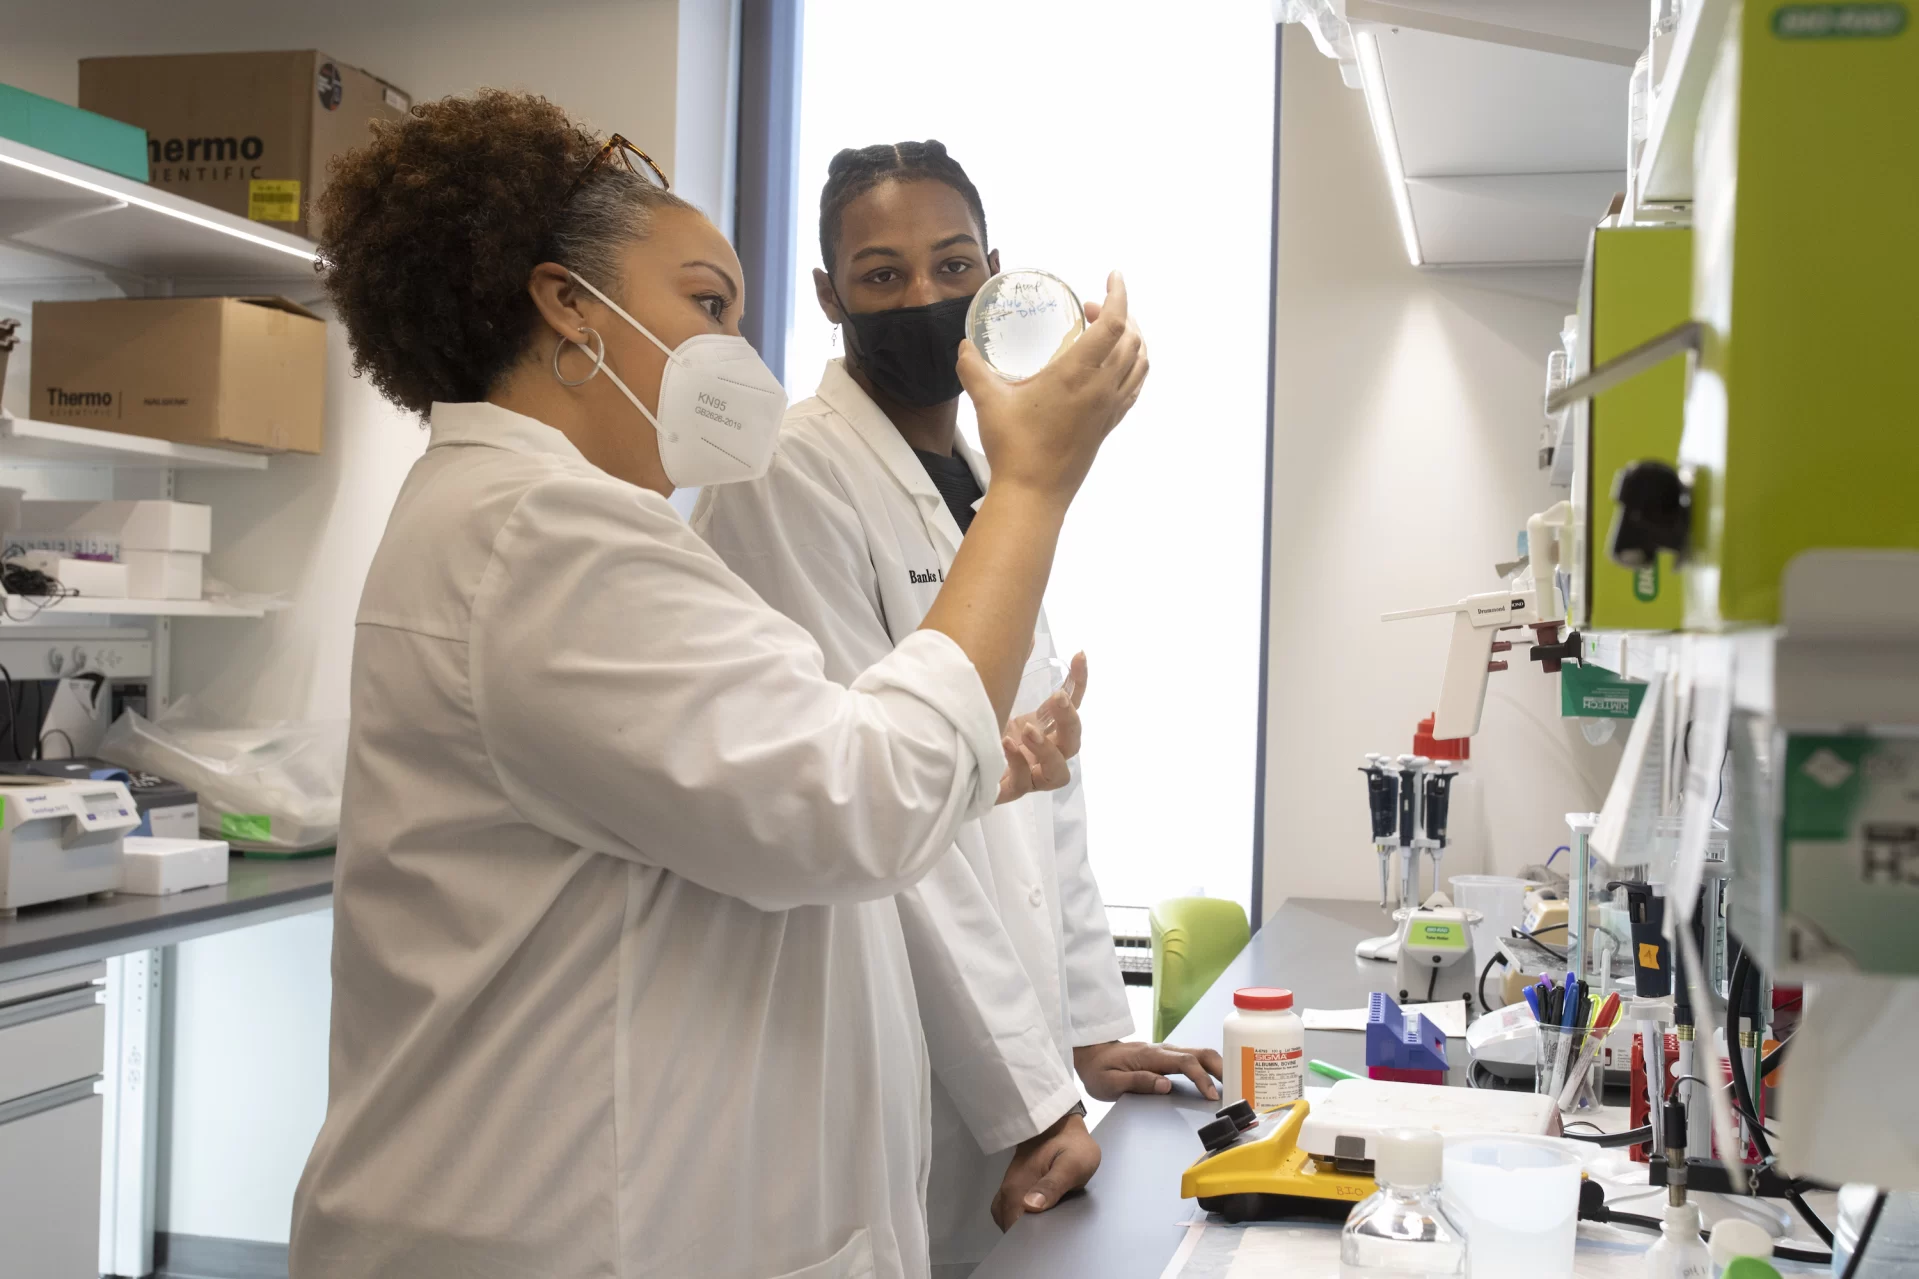 Assistant Professor of Biology Lori Banks works with her thesis students in her second floor lab in Bonney Science.

In group photo (pease see for IDs), from left to right: 

Osceola “Ossie” Heard ’22 of Newark, N.J., biochemistry major (gray/black sweater and black mask)

Alex Weissman ’22 of Bedford, Mass, a biology major, chemistry minor (black sweater, bunny mask)

Dr. Lori Banks

Maddie Feldmeier ’22 of Palo Alto, Calf., a biochemistry minor (fray sweater, black mask)

Emily Claire Duffy ’22 of Belmont Mass., a biology major, chemistry minor (maroon sweater and black mask)

Clara Porter ’22 of Portland, Ore., a biology major, chemistry minor (black turtle neck, pink flower mask)